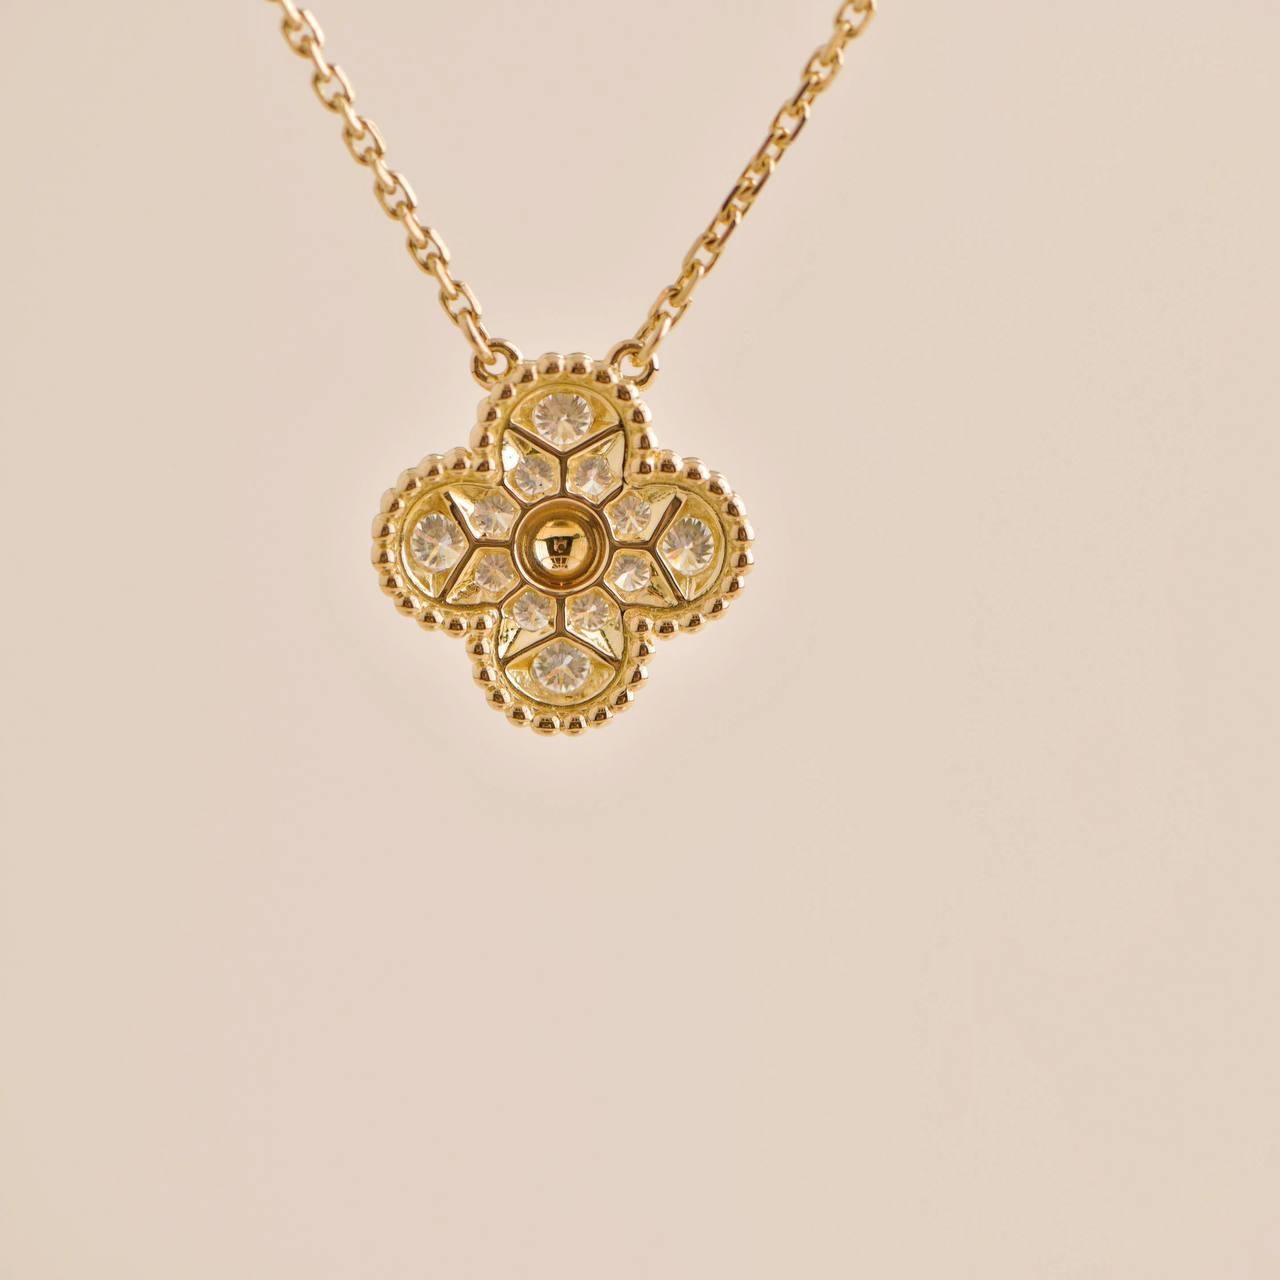 Van Cleef & Arpels Vintage Alhambra Diamond Paved Yellow Gold Pendant Necklace In Excellent Condition For Sale In Banbury, GB